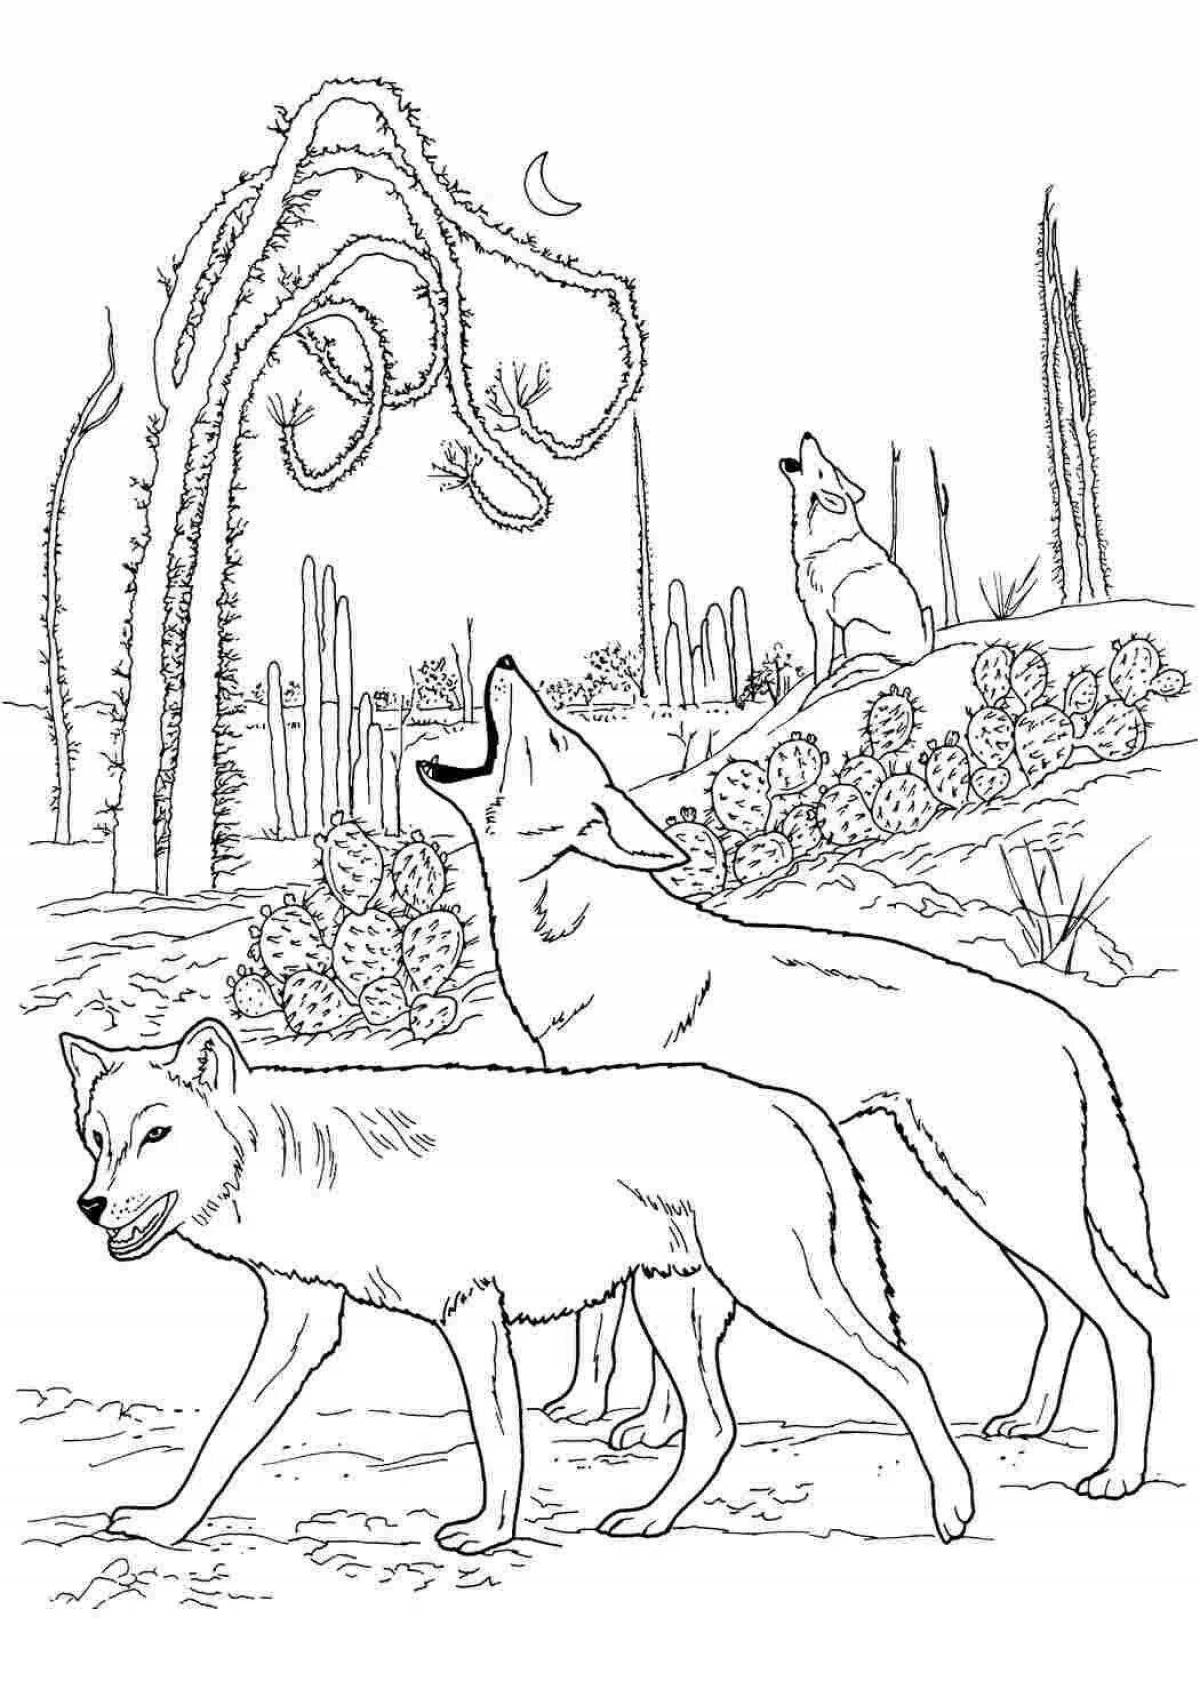 Beautiful wolf legend coloring page